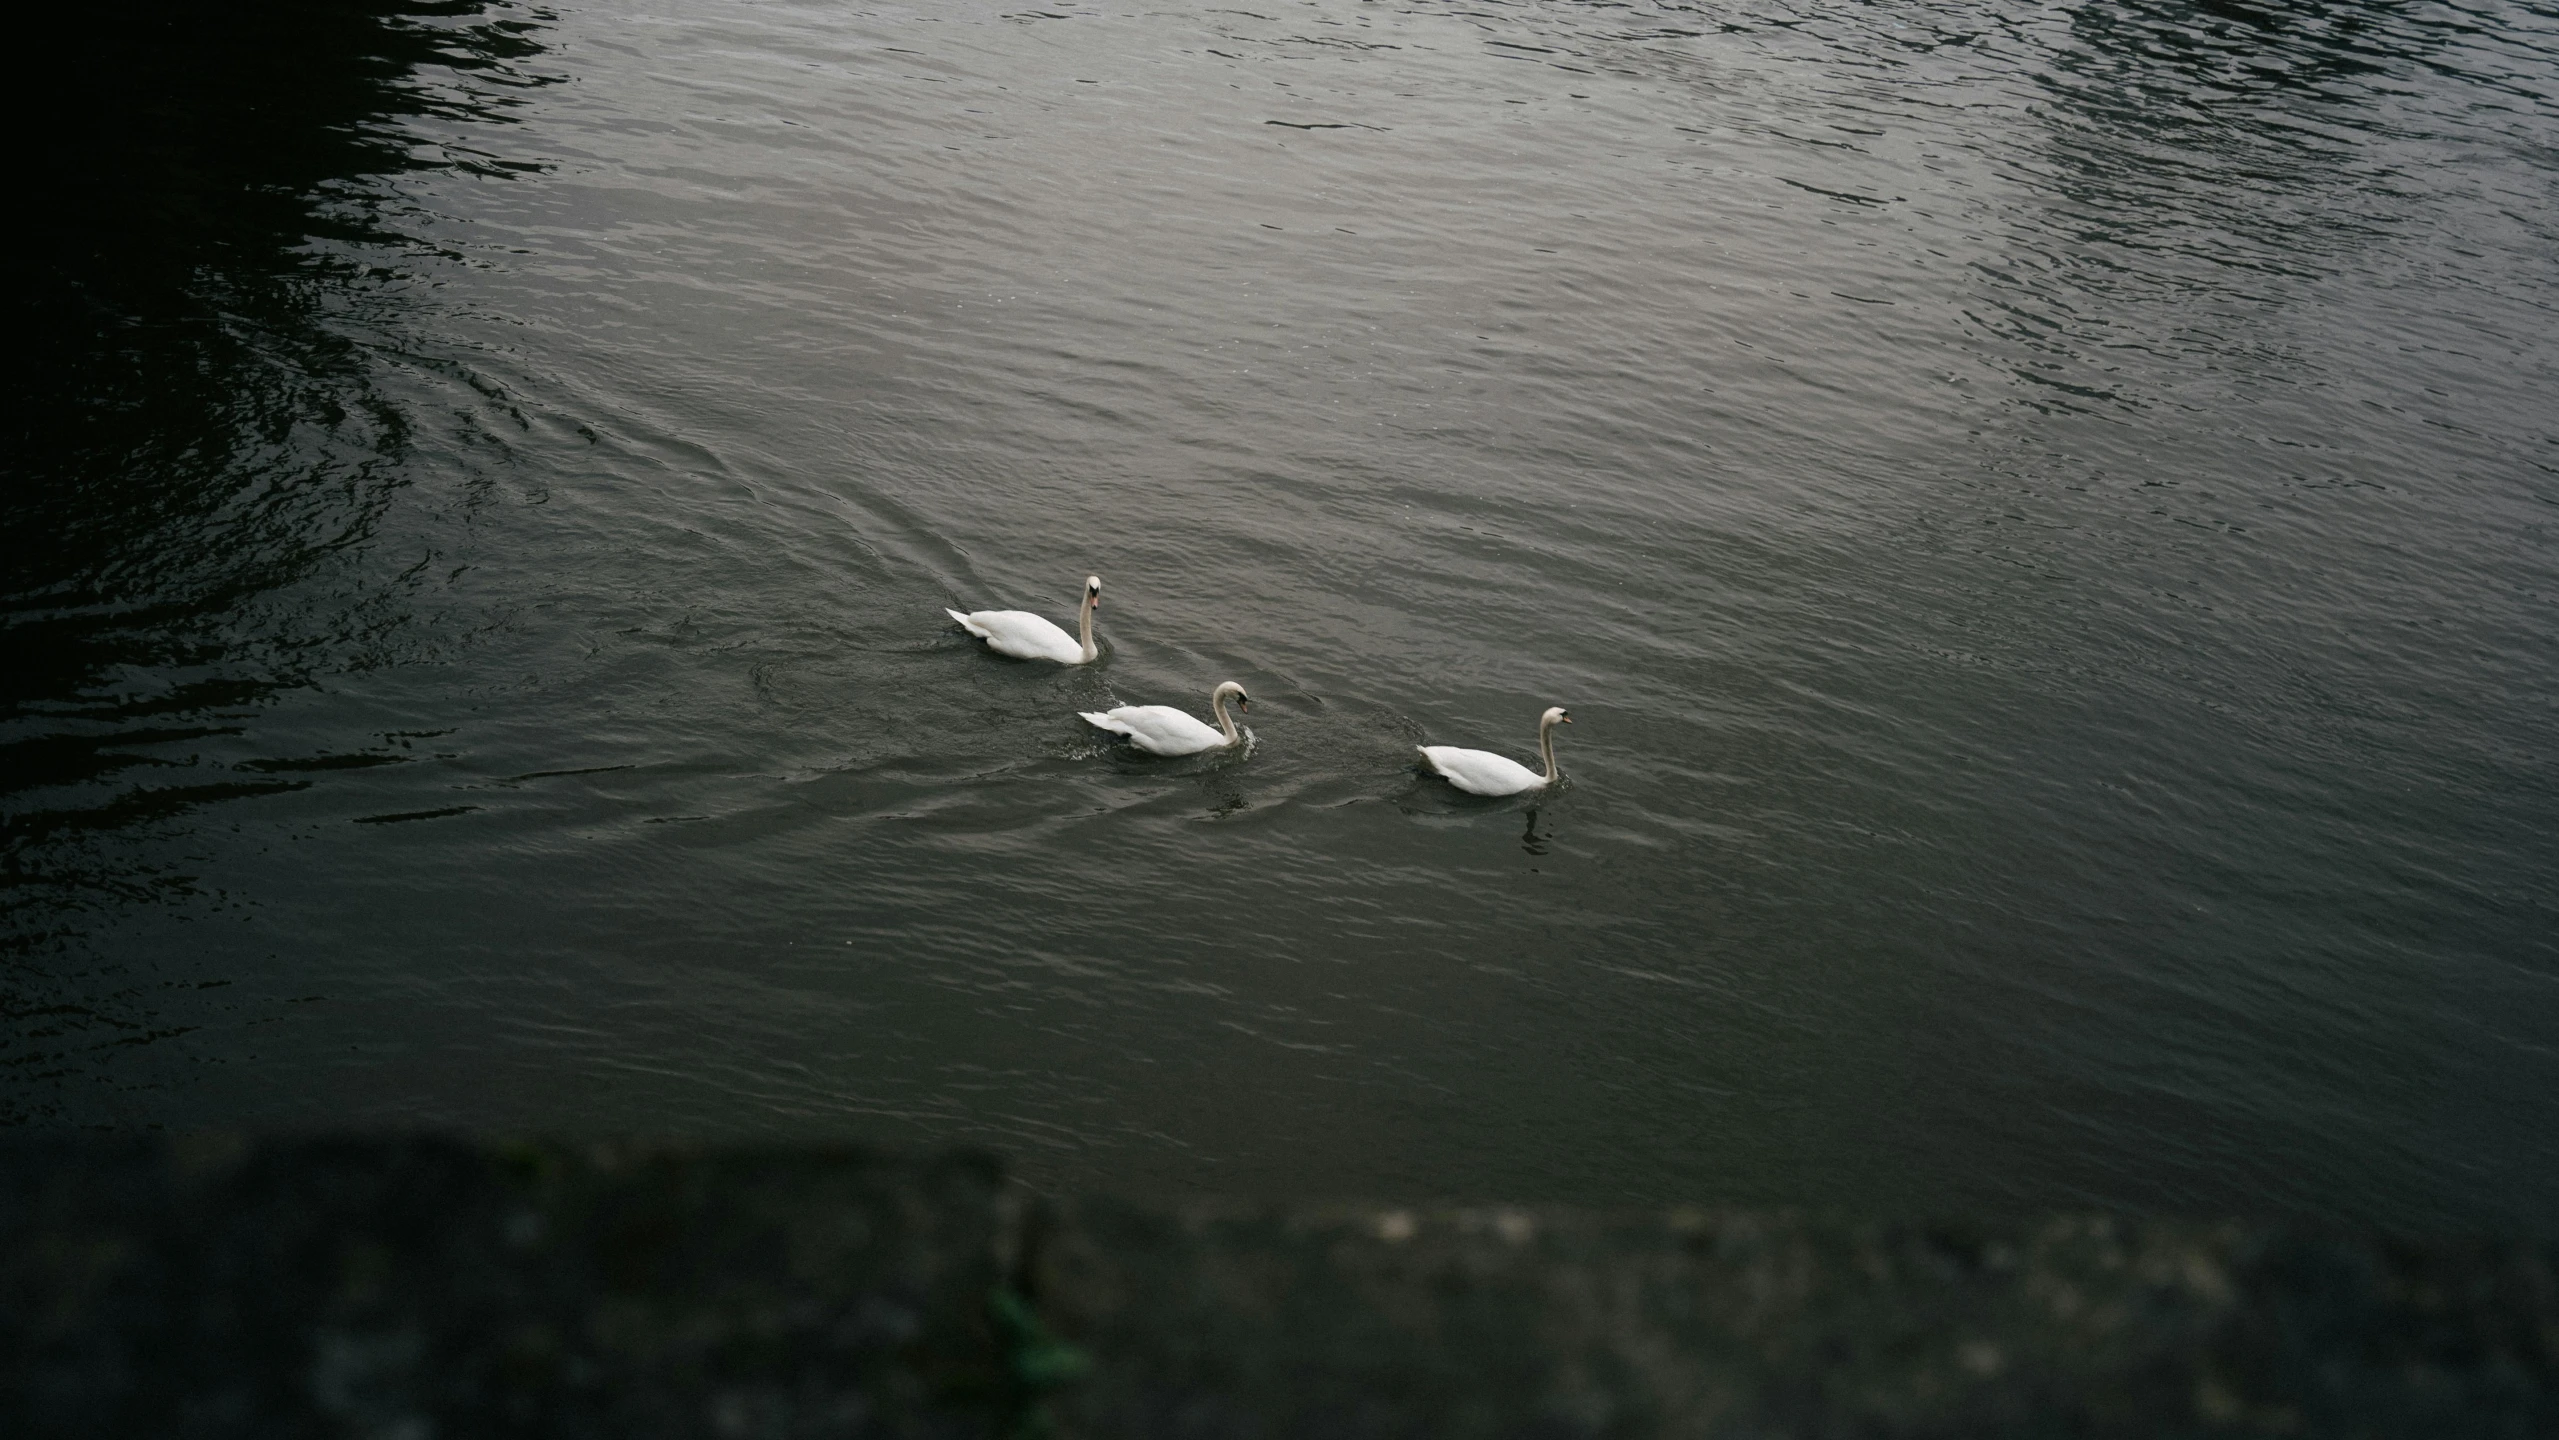 two swans floating in the water with another duck nearby